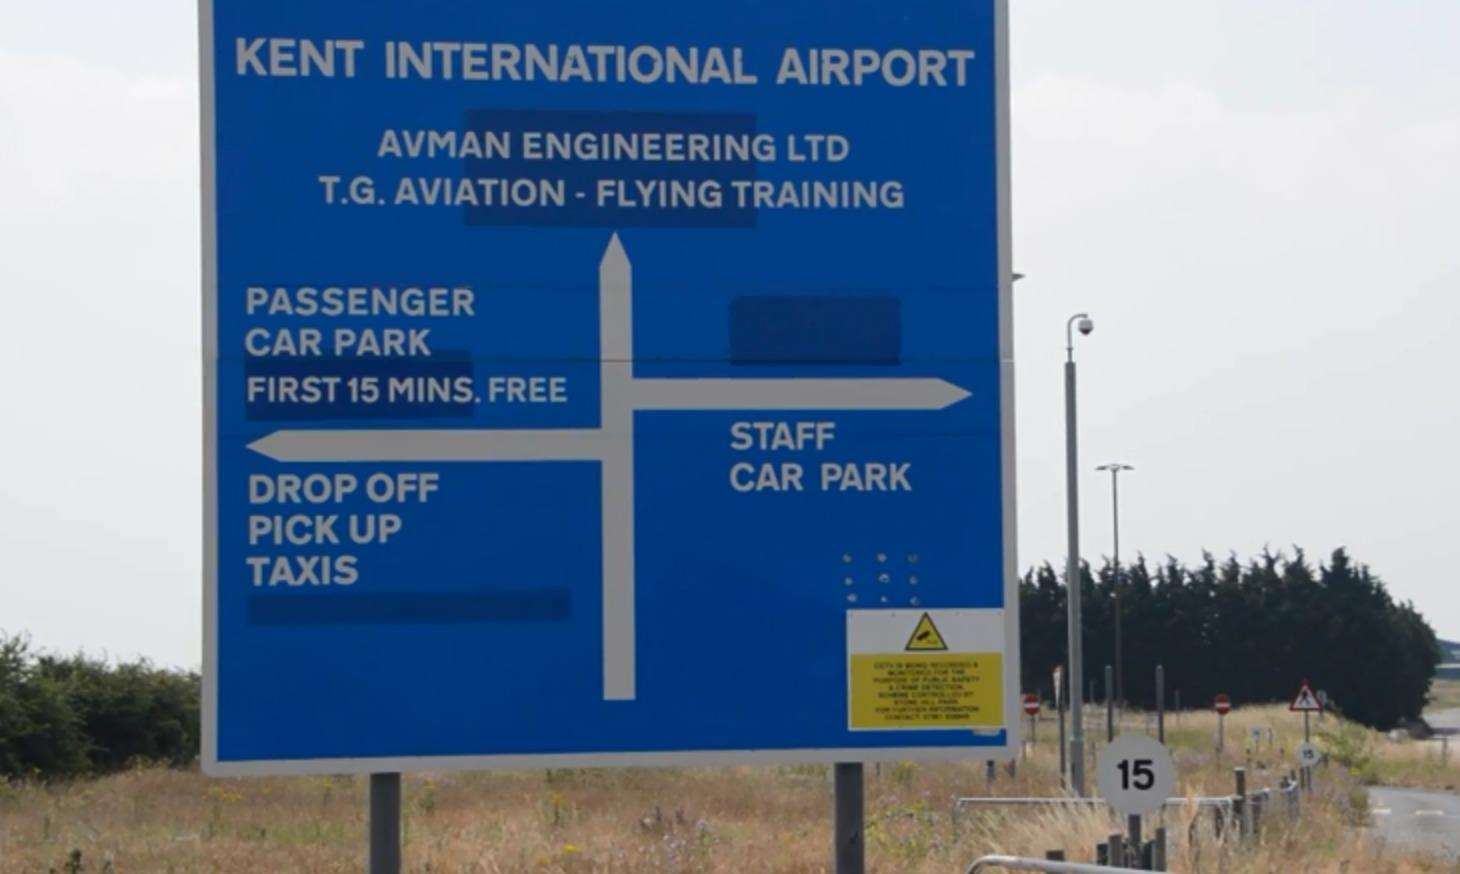 Manston Airport could be reopened